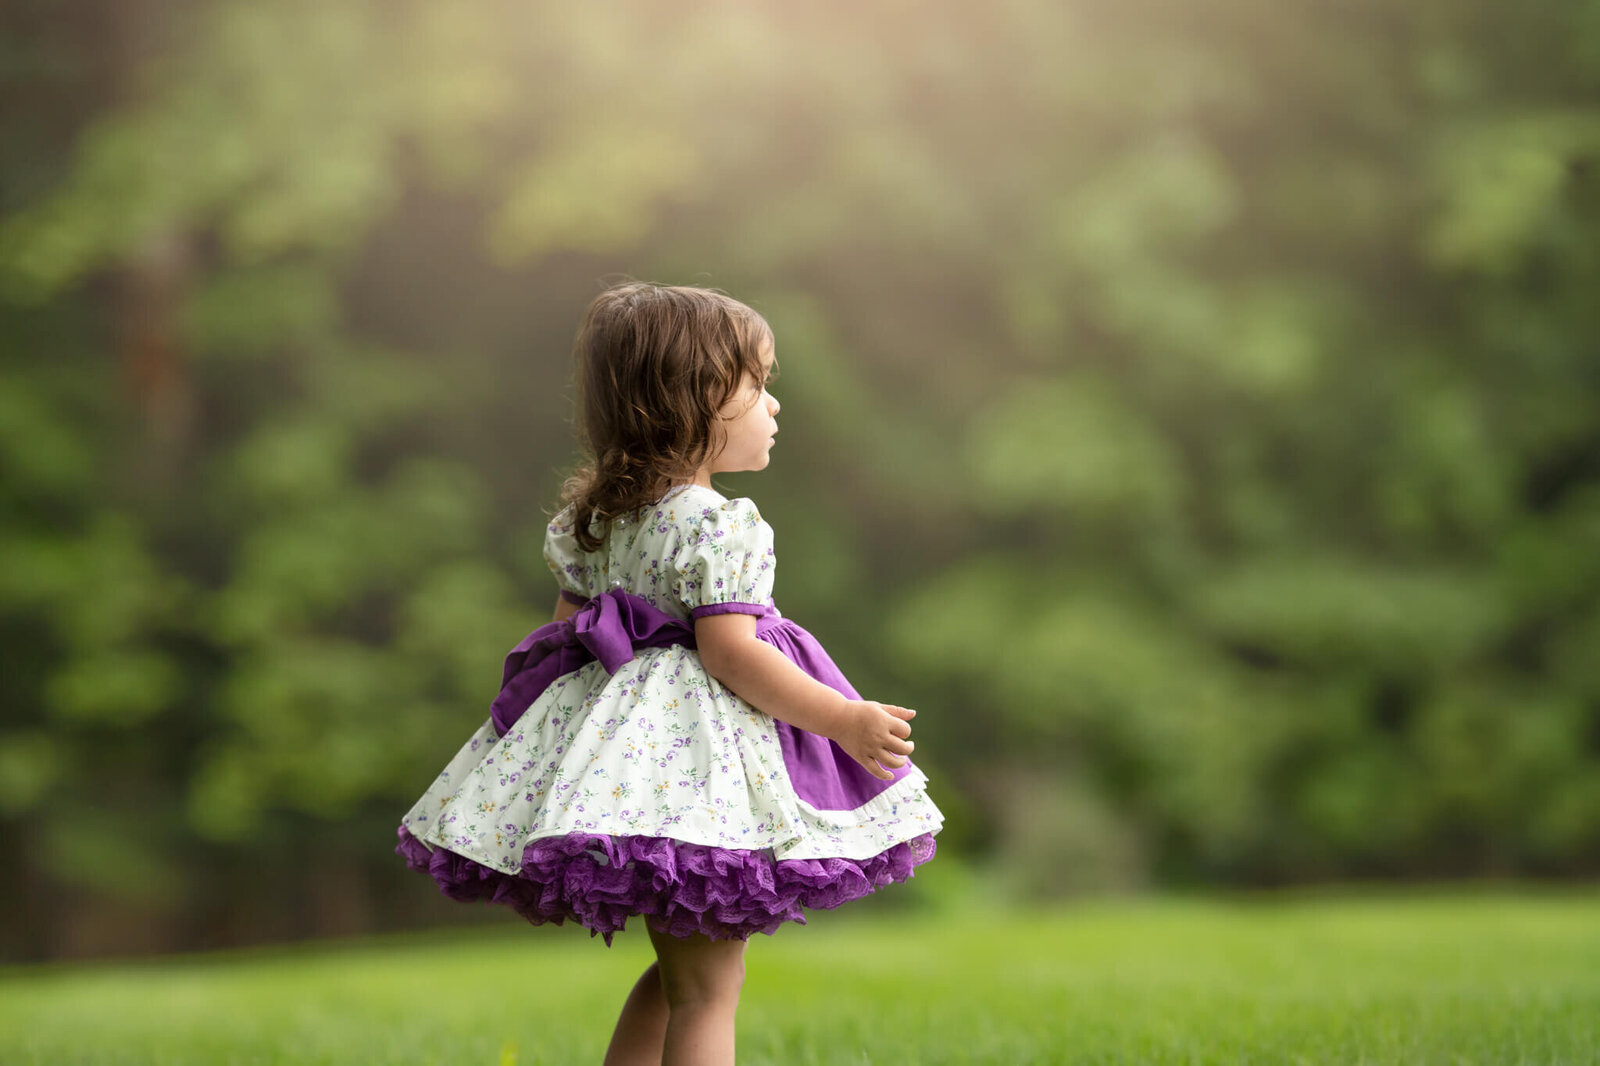 Toddler girl in vintage dress looking off in distance to the right